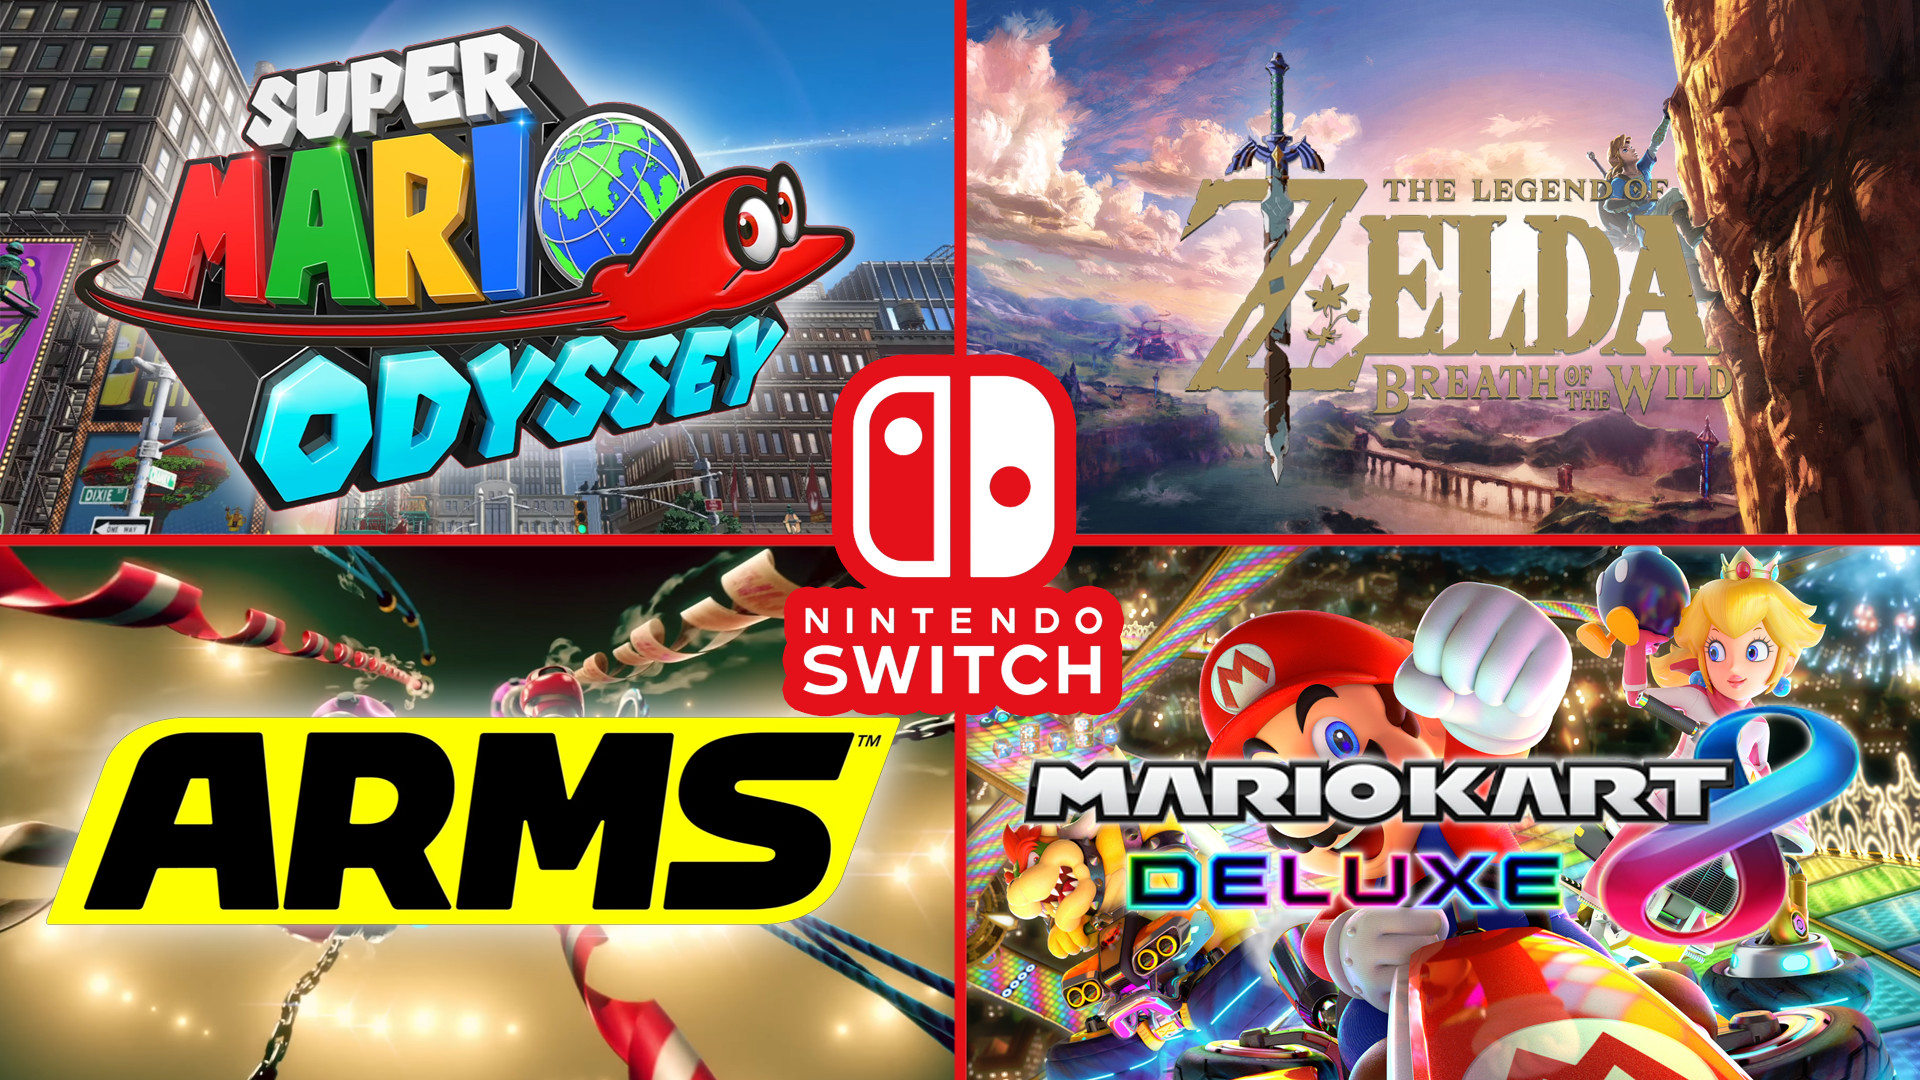 1920x1080 WallpaperI made a wallpaper for some Nintendo Switch games I'm excited for.